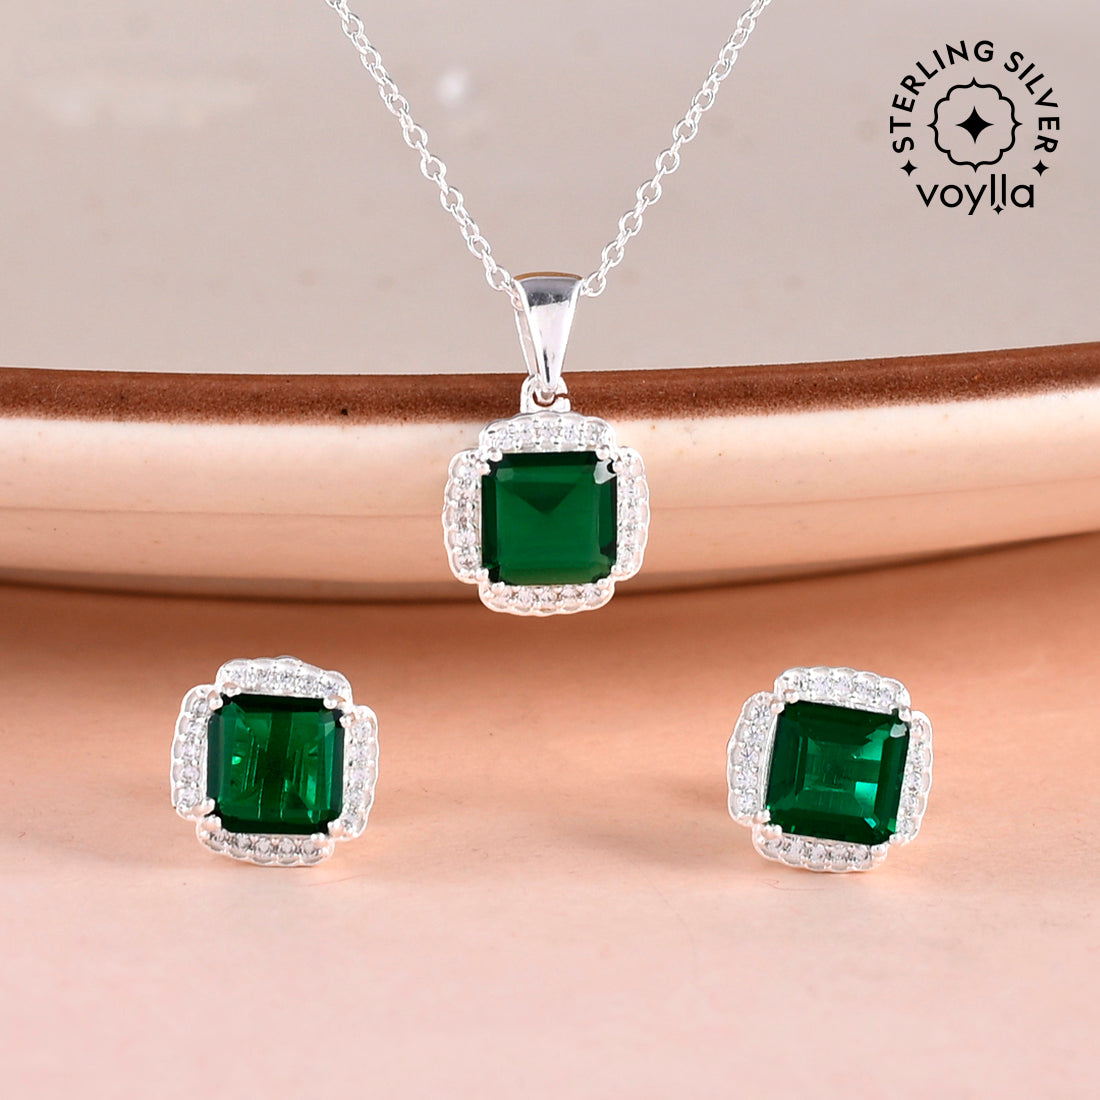 925 Sterling Silver Green Stone Decked Pendant Set